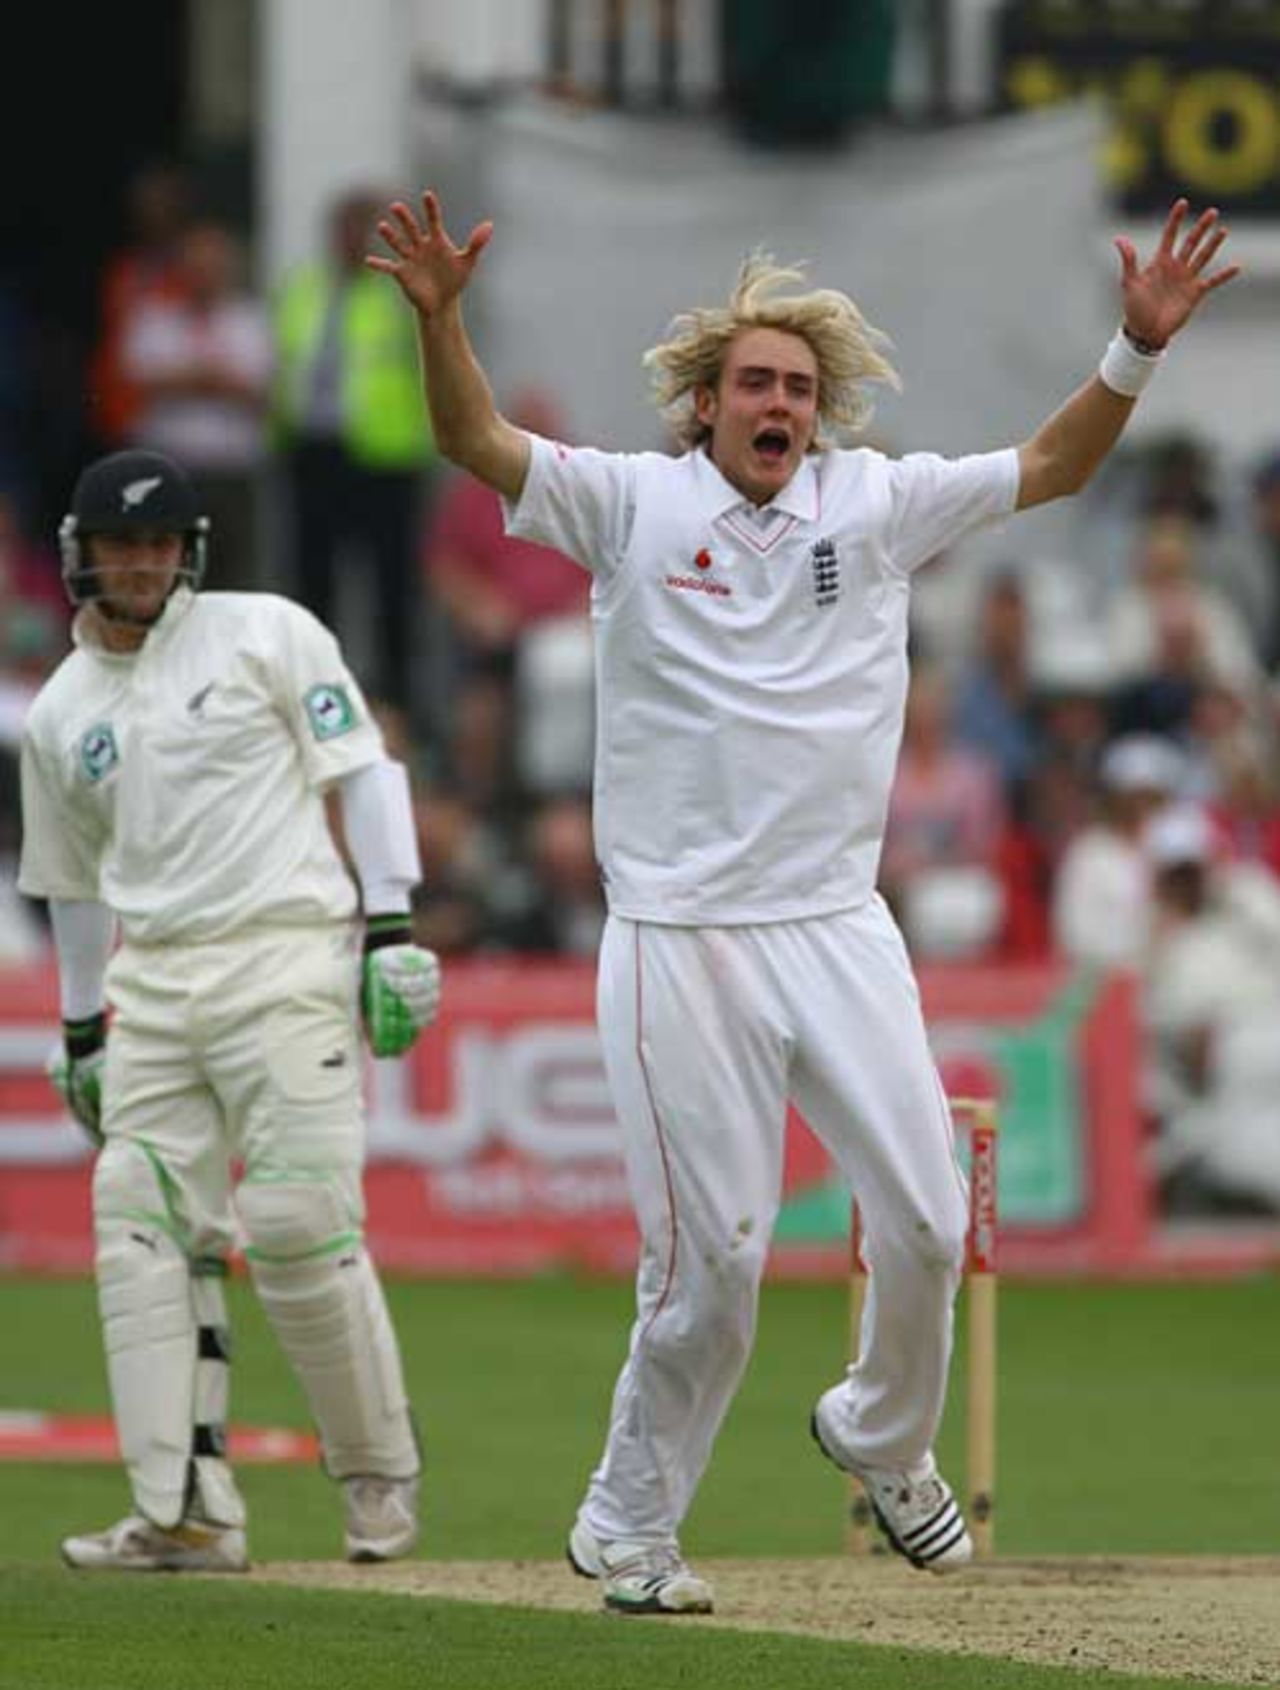 Stuart Broad gets very excited about an appeal against Brendon McCullum, England v New Zealand, 3rd Test, Trent Bridge, June 7, 2008